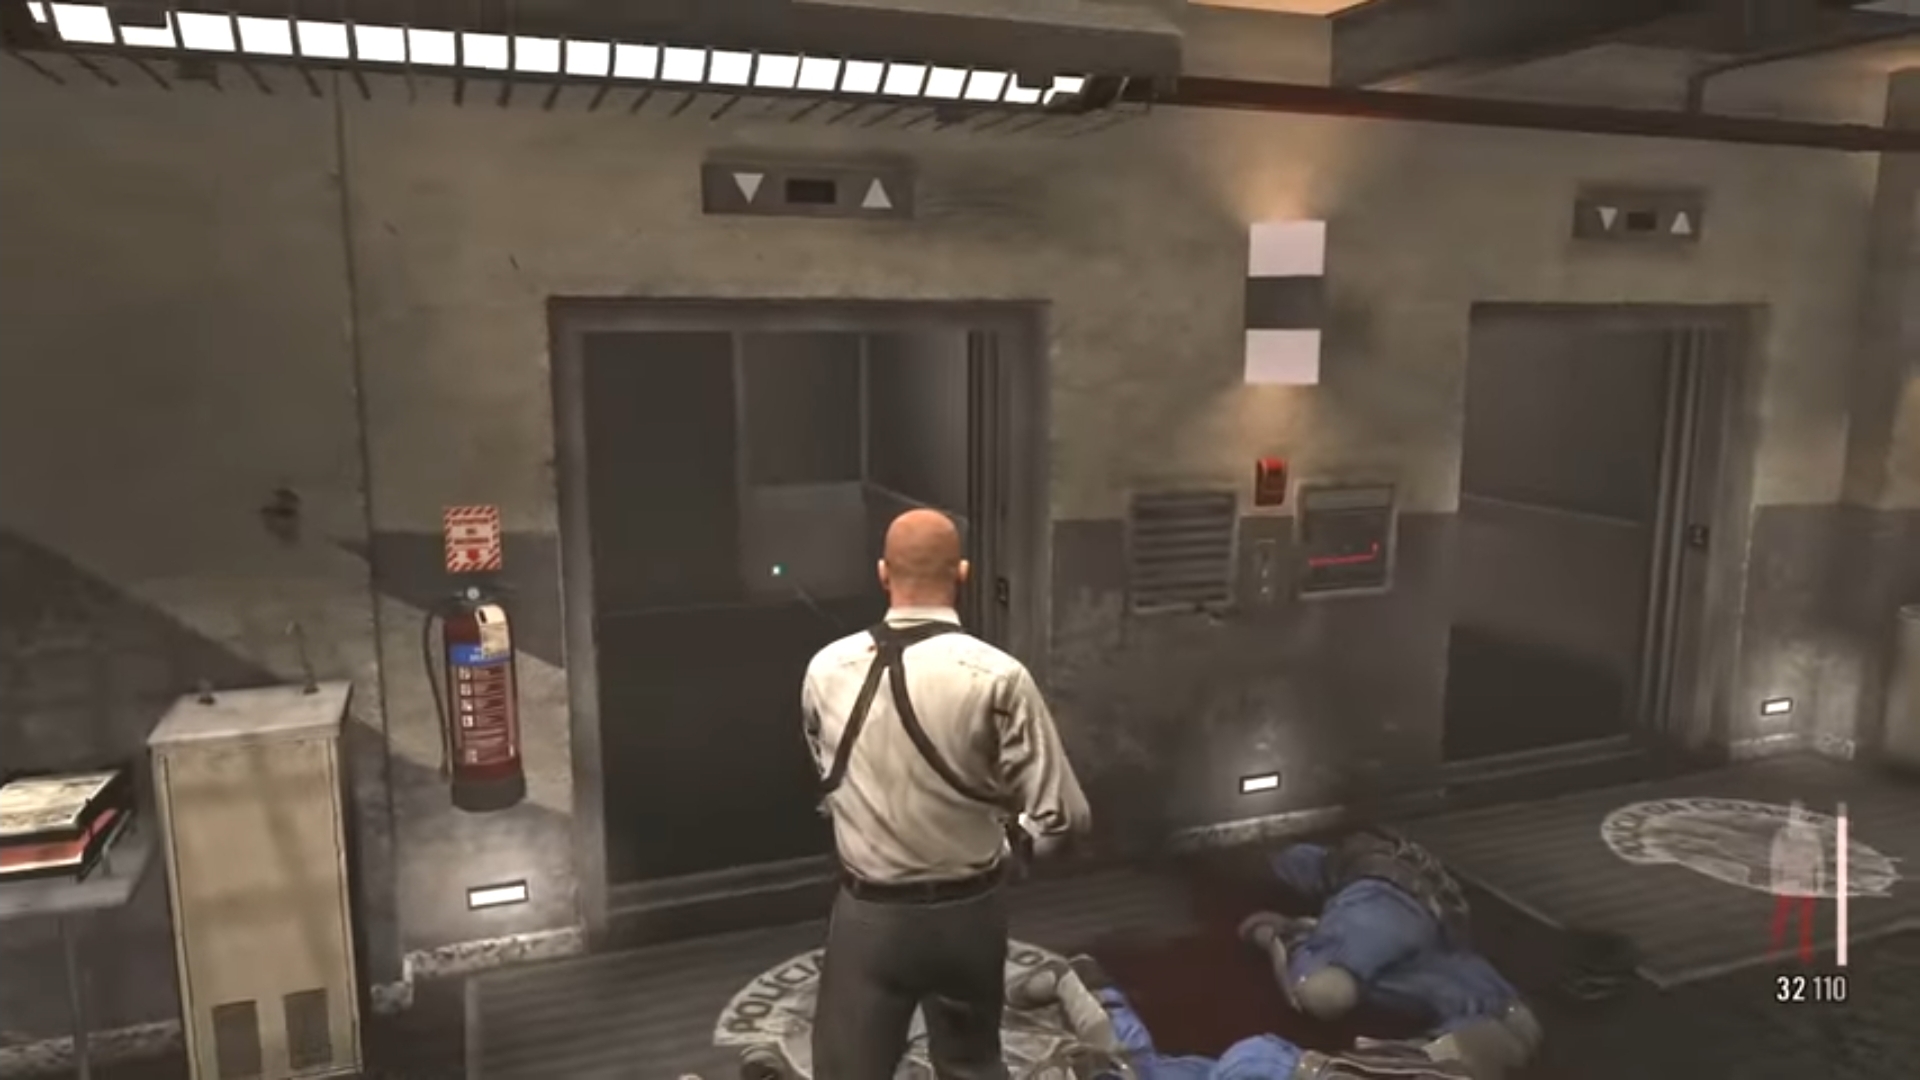 max payne 2 the fall of max payne pc requirements